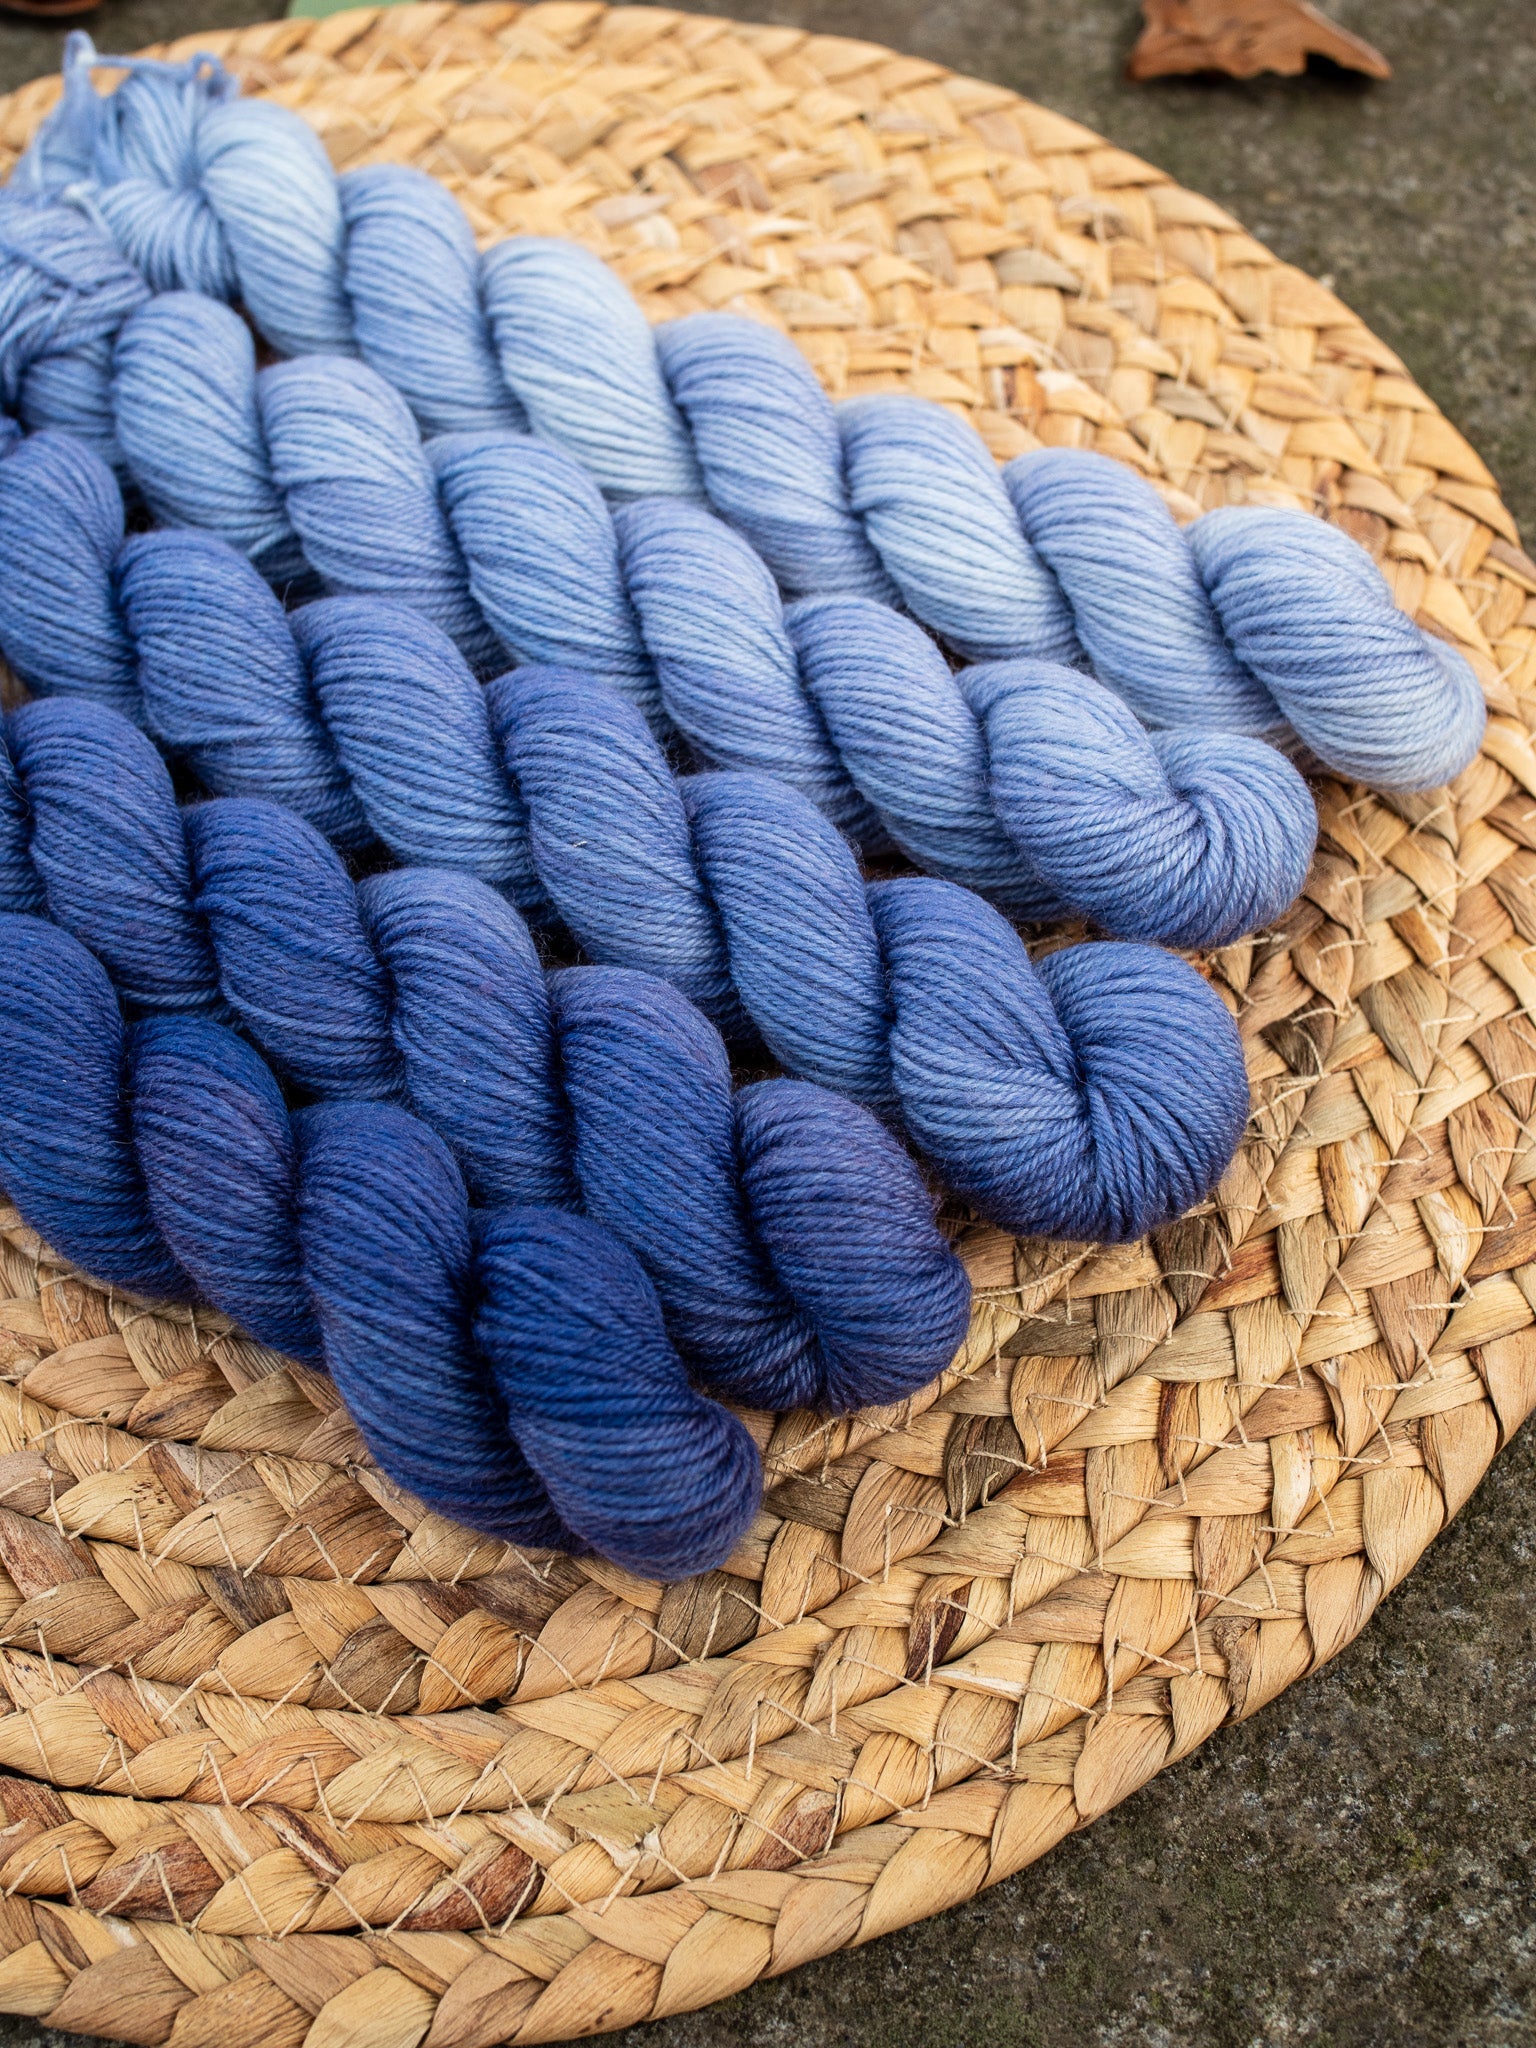 5 mini skeins of hand dyed yarn in a gradient/fade set in color denim blue.